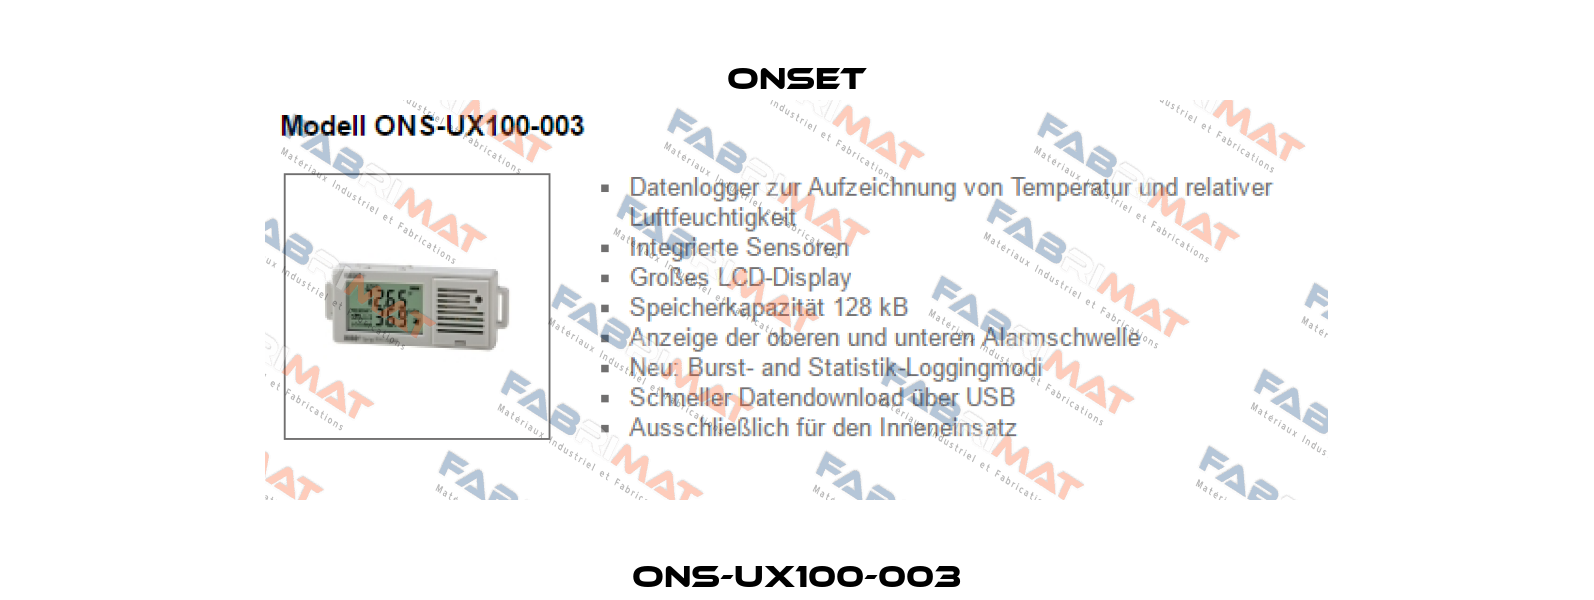 ONS-UX100-003 Onset